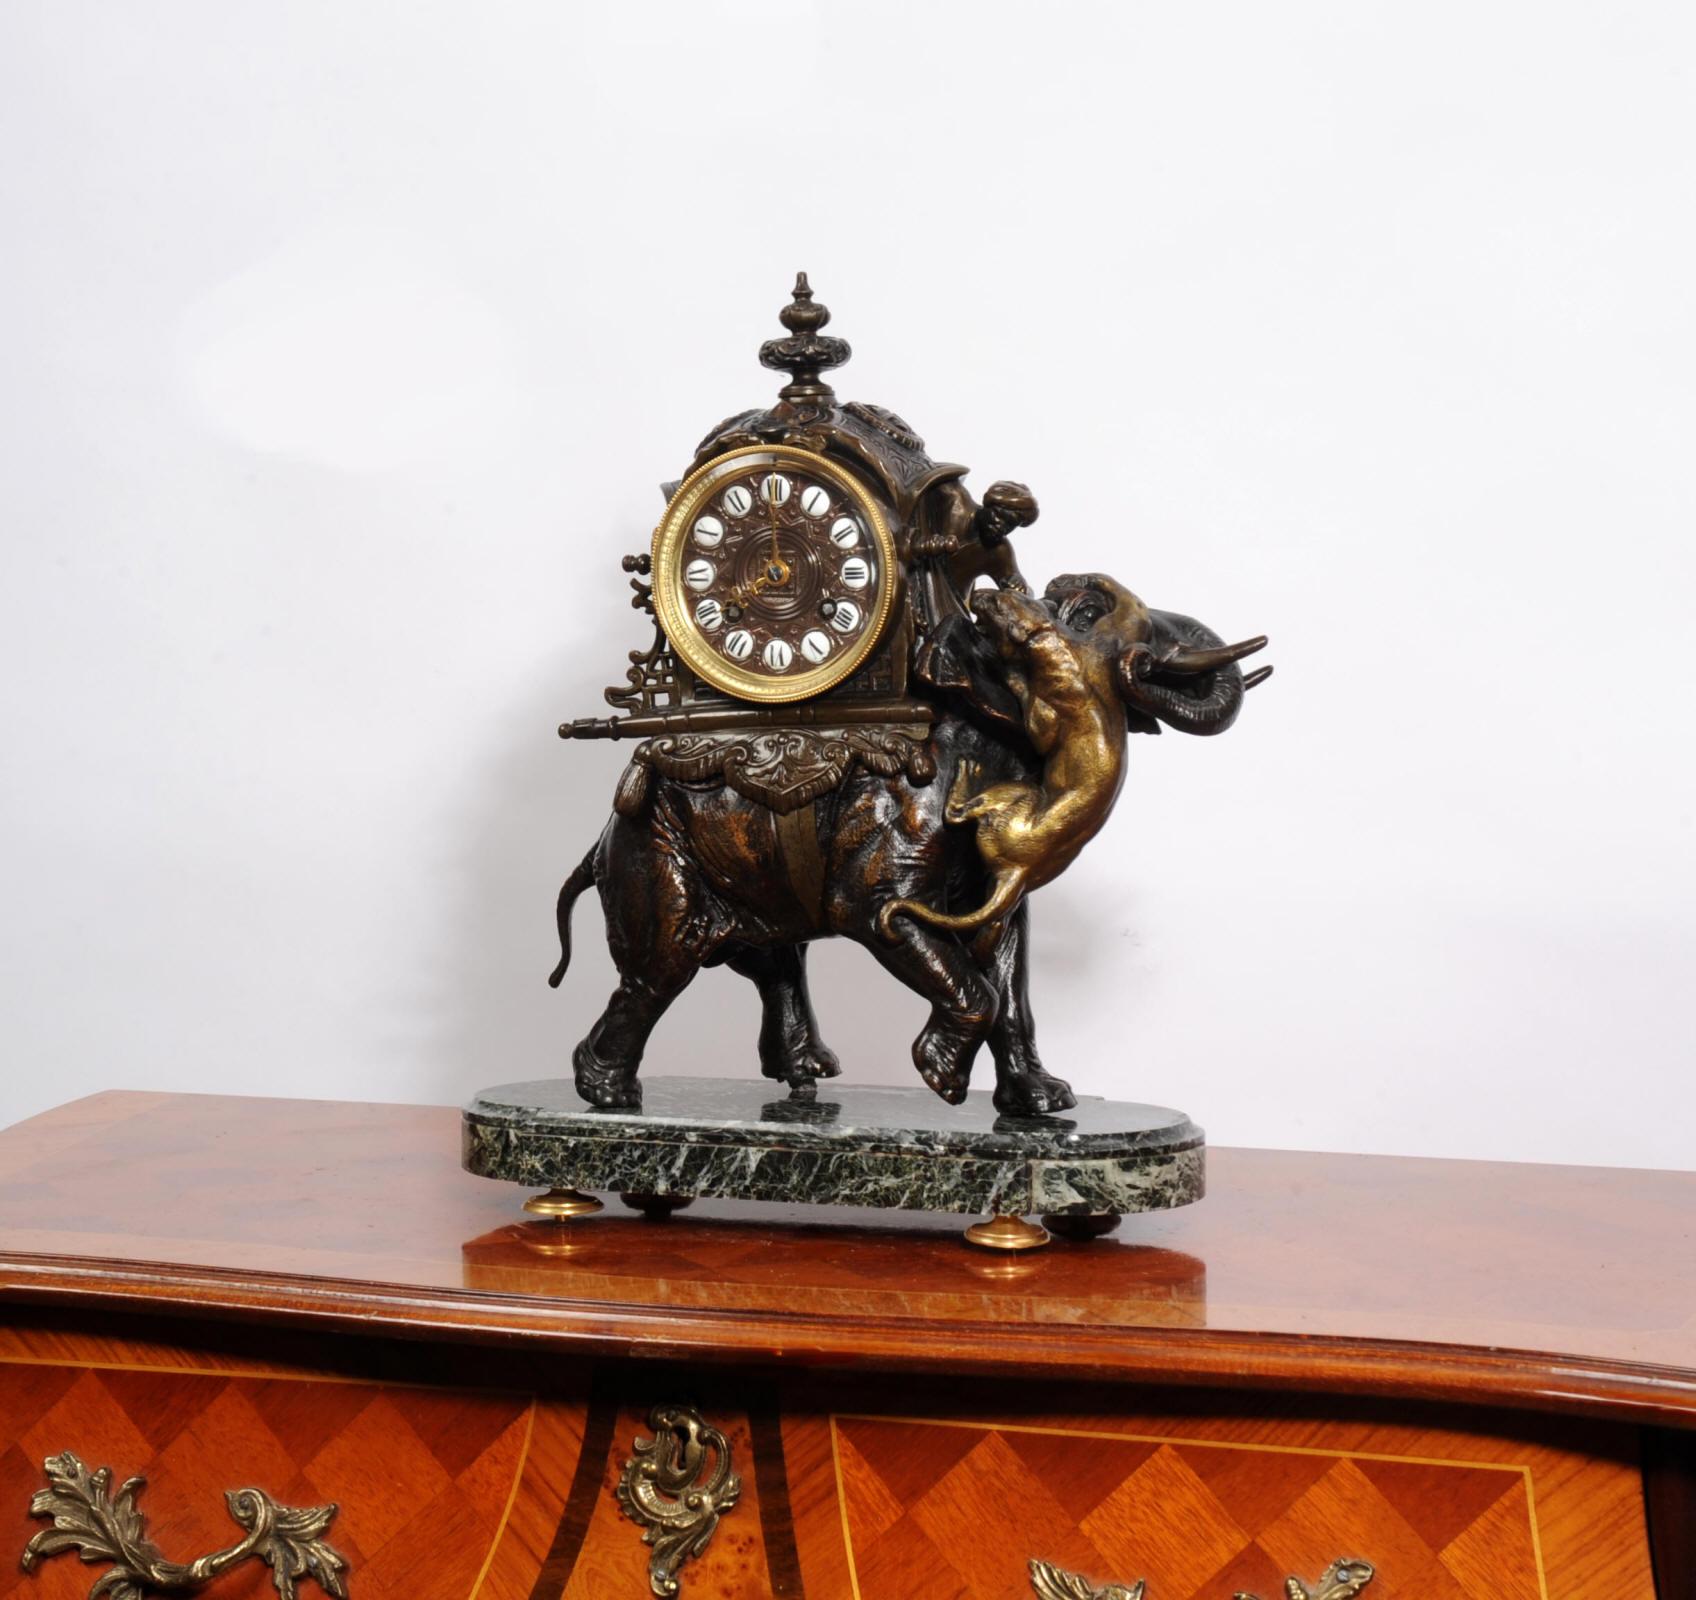 A rare and impressive antique French clock, modelled as an elephant carrying a howdah with a tiger being fought of by the mahout. Beautifully modelled in bronze patinated metal with highlights in gilt. The elephant is mounted on a green marble base